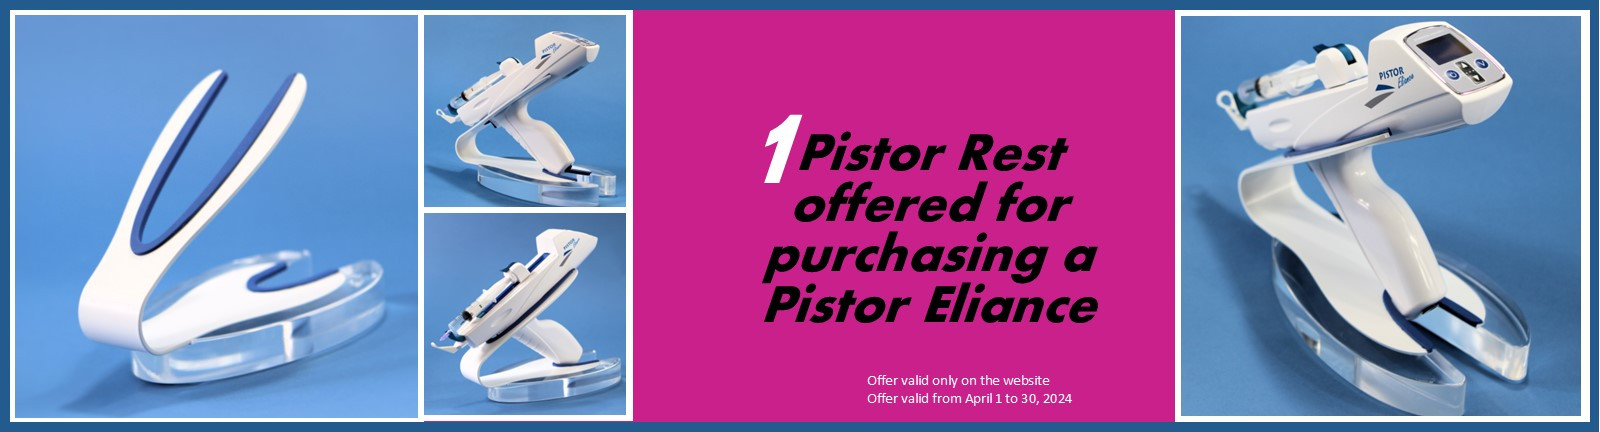 Pistor Rest offered for purchasing a Pistor Eliance